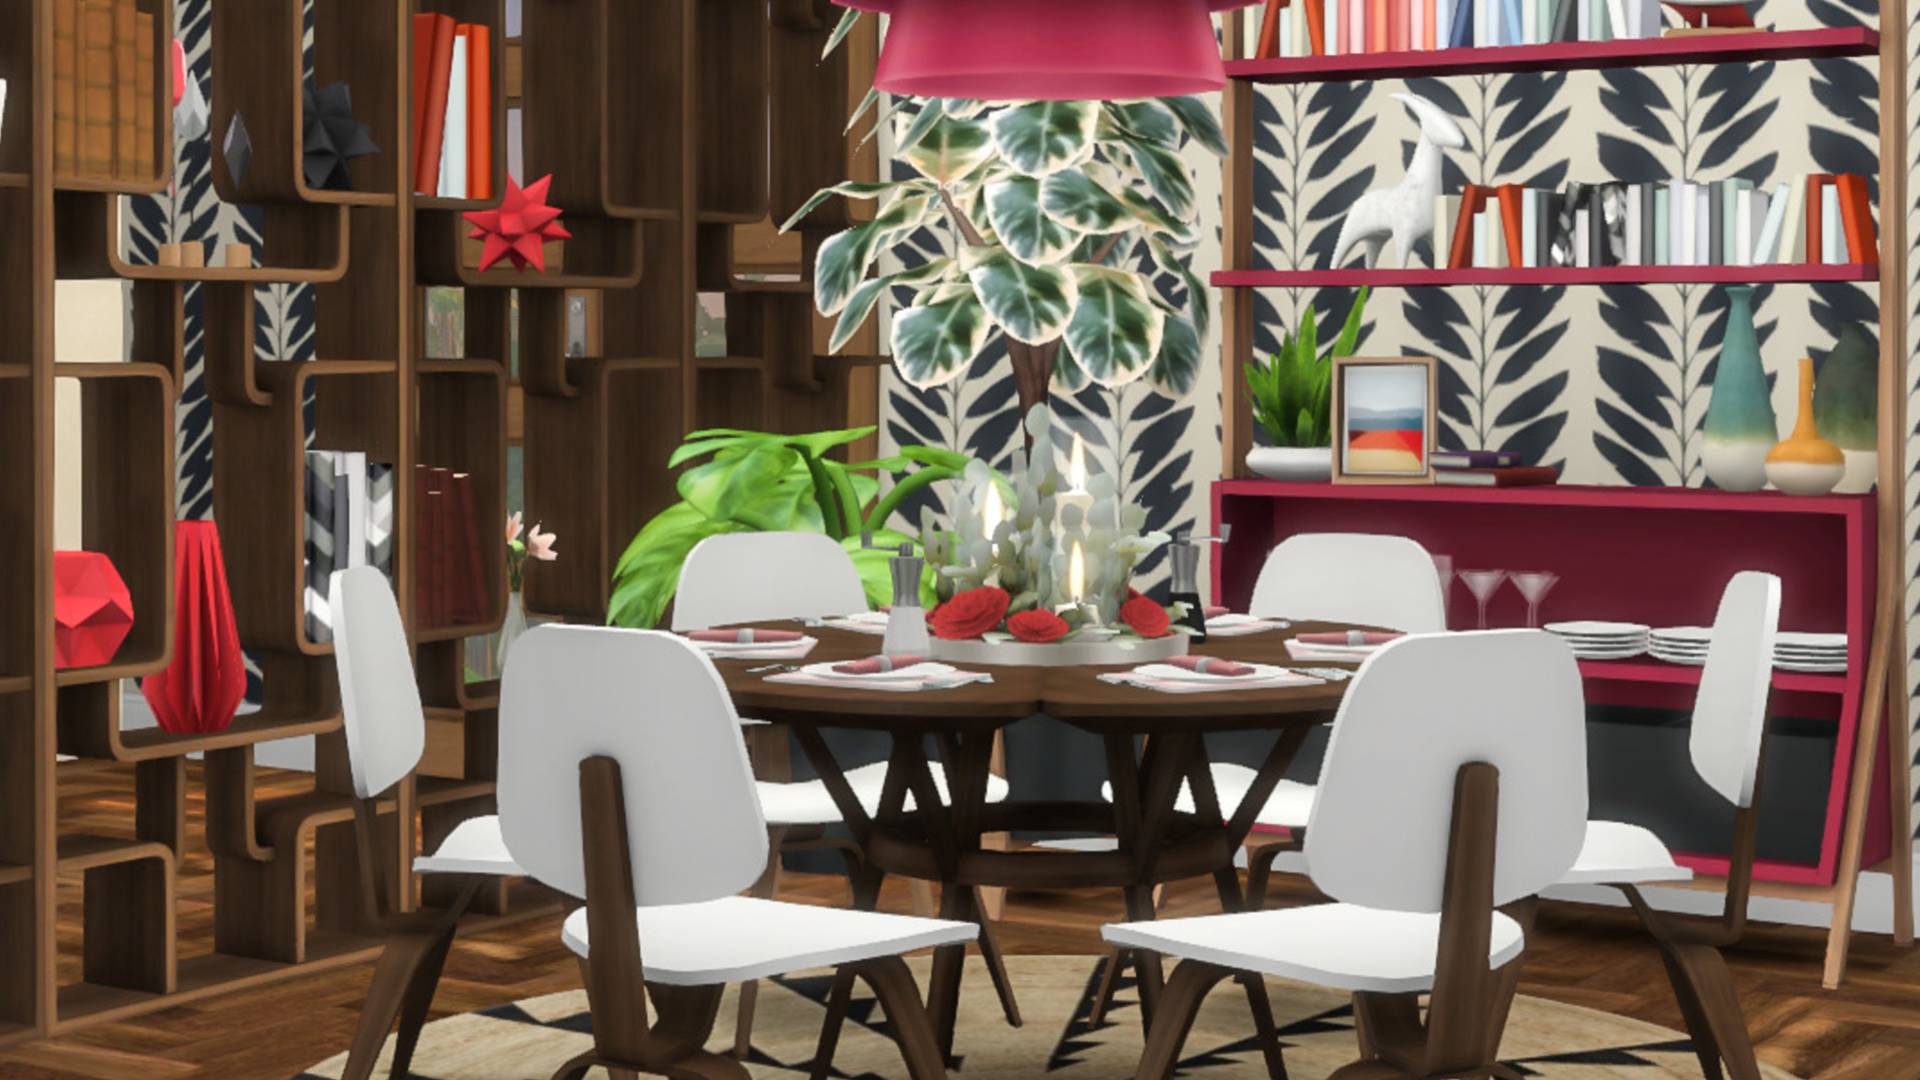 Sims 4 CC: Dining room with colorful patterned decorations and furniture.